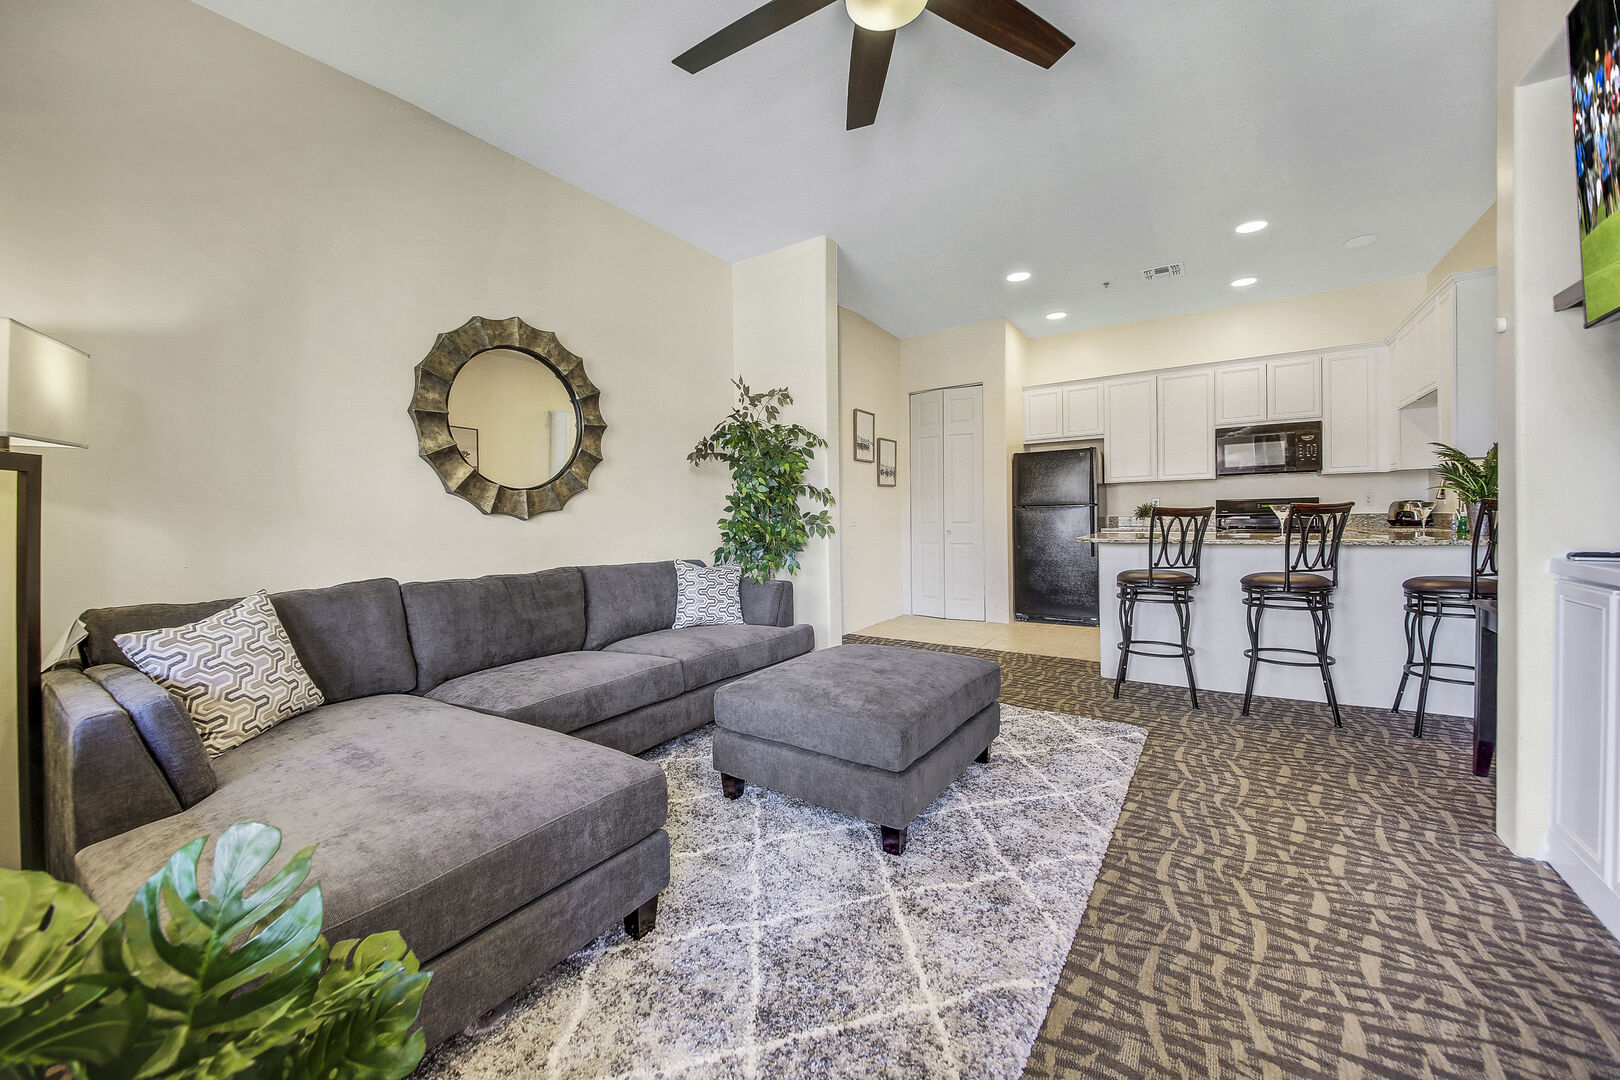 Treat yourself to the perfect vacation rental close to Old Town La Quinta where you will find boutique shopping, as well as casual and fine dining options.